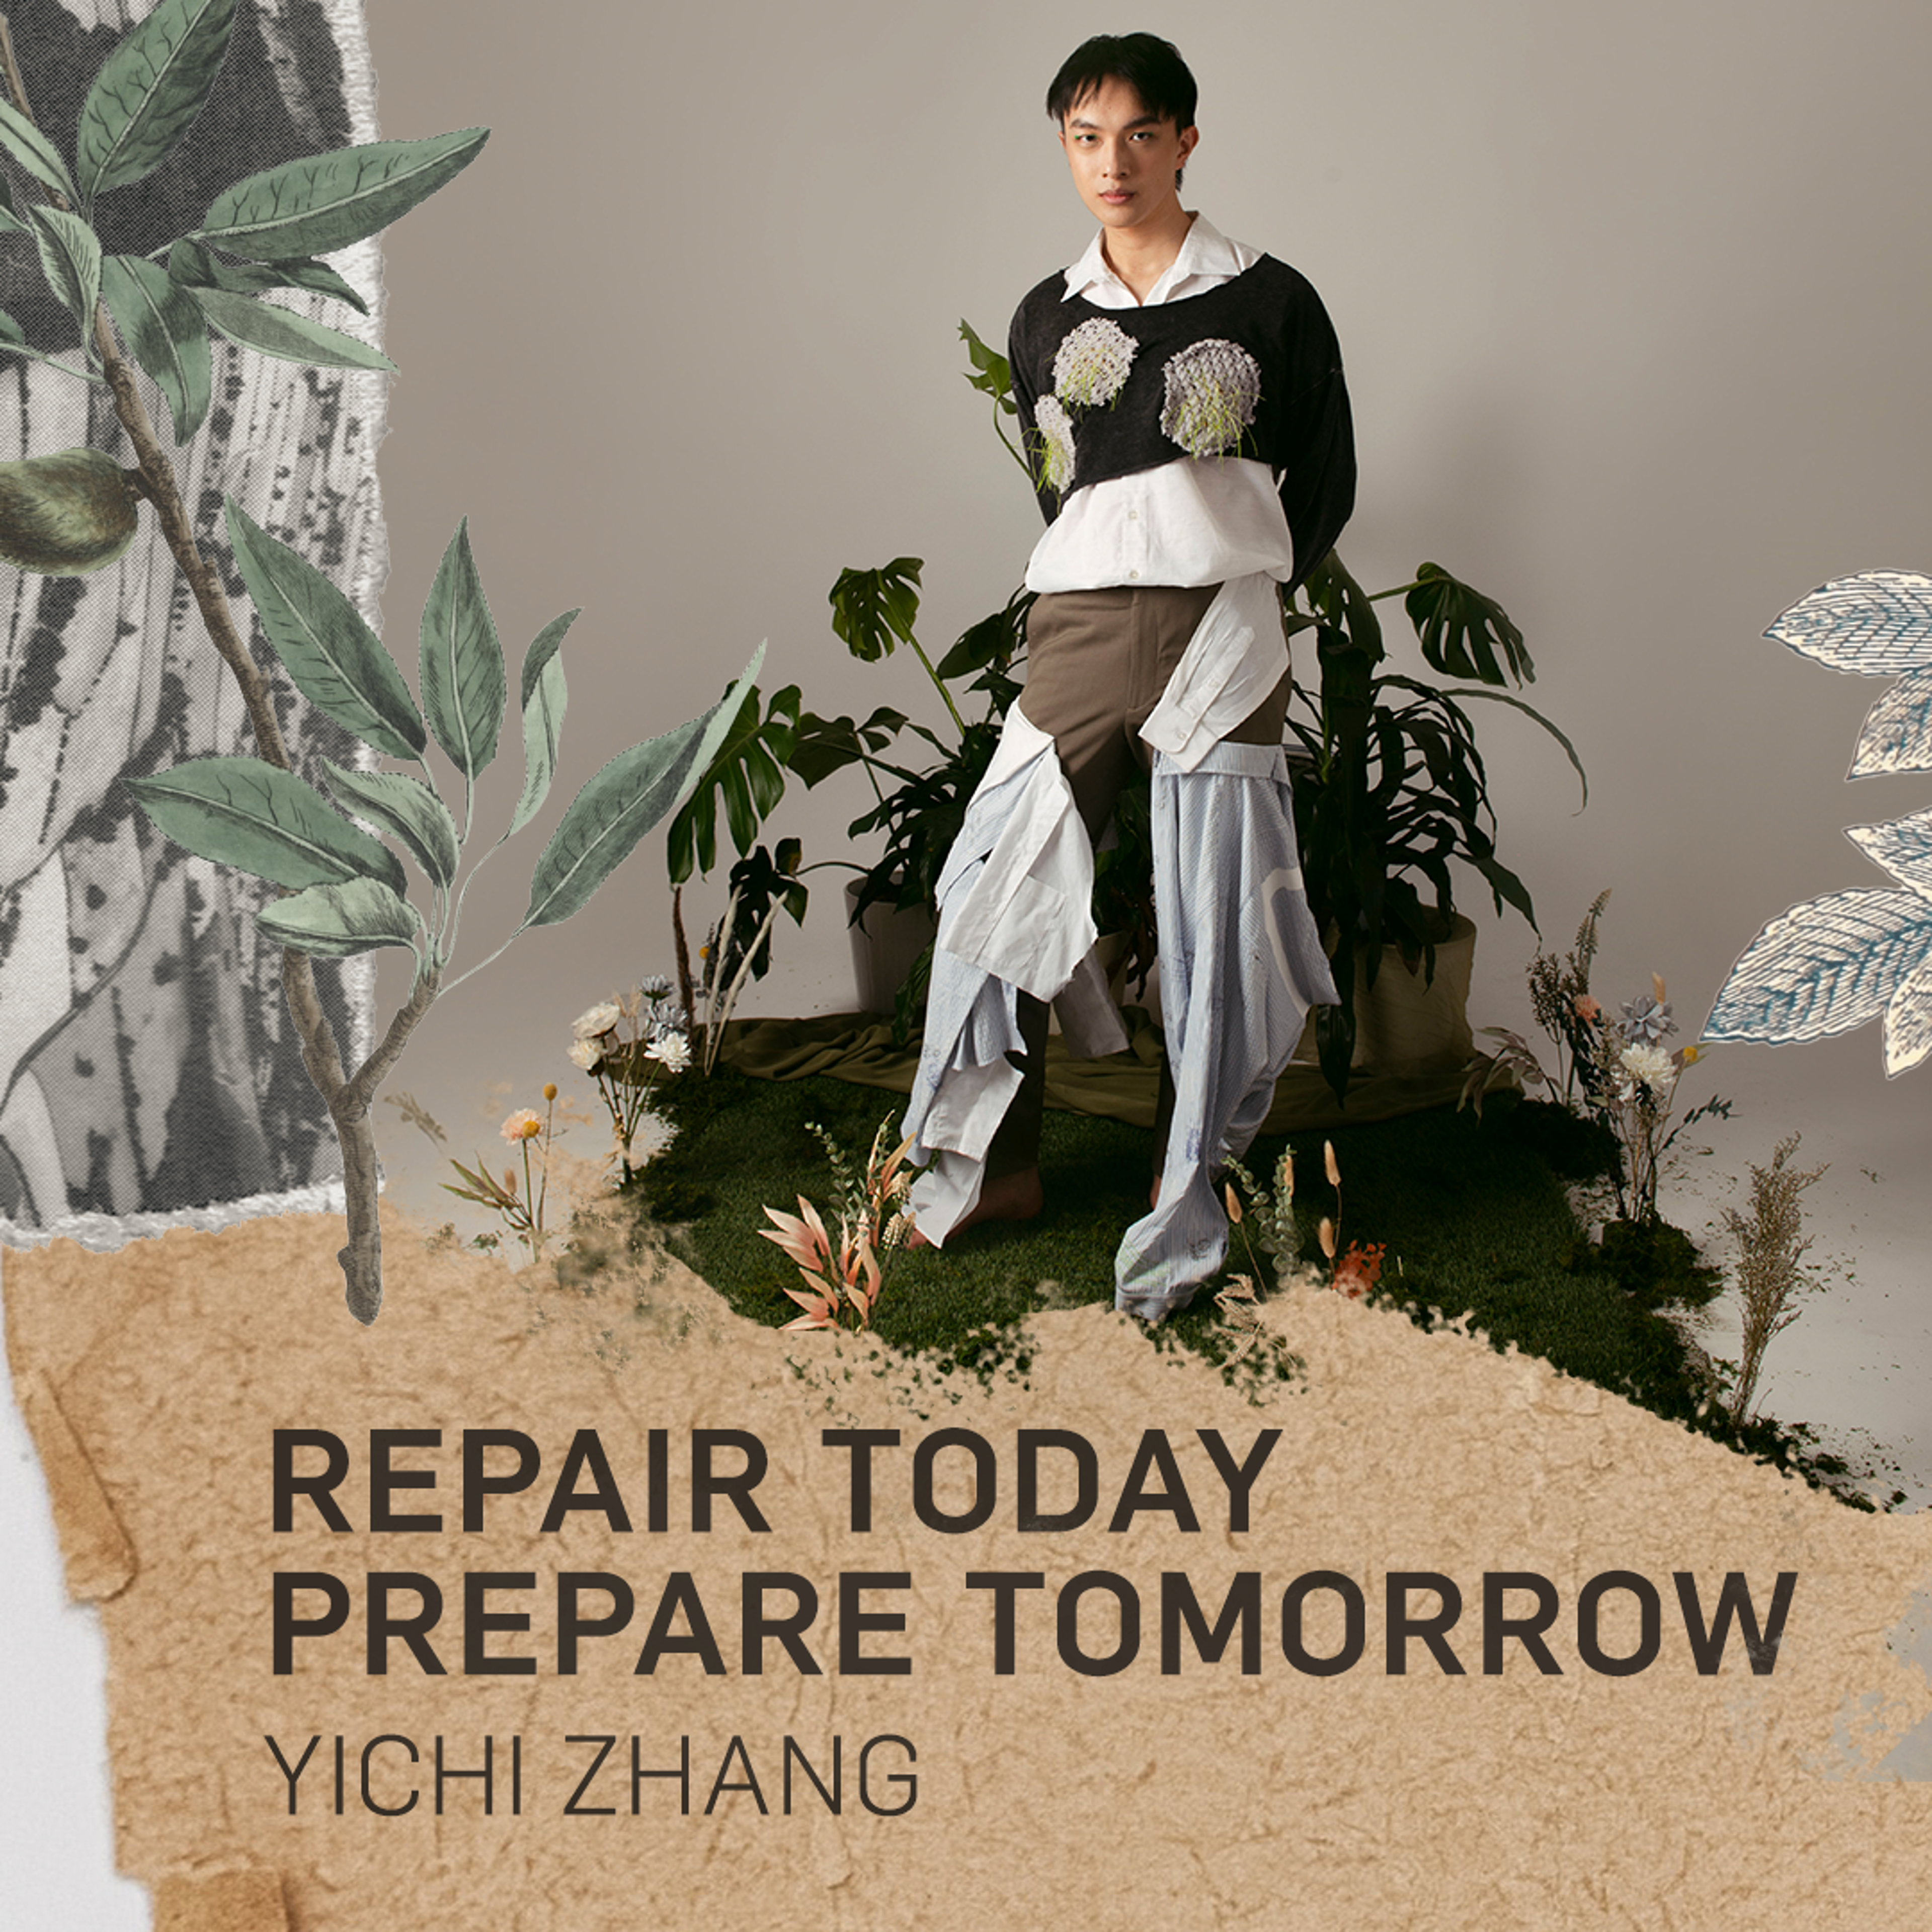 A male model presents eco-conscious attire amid a blend of real and illustrated foliage.